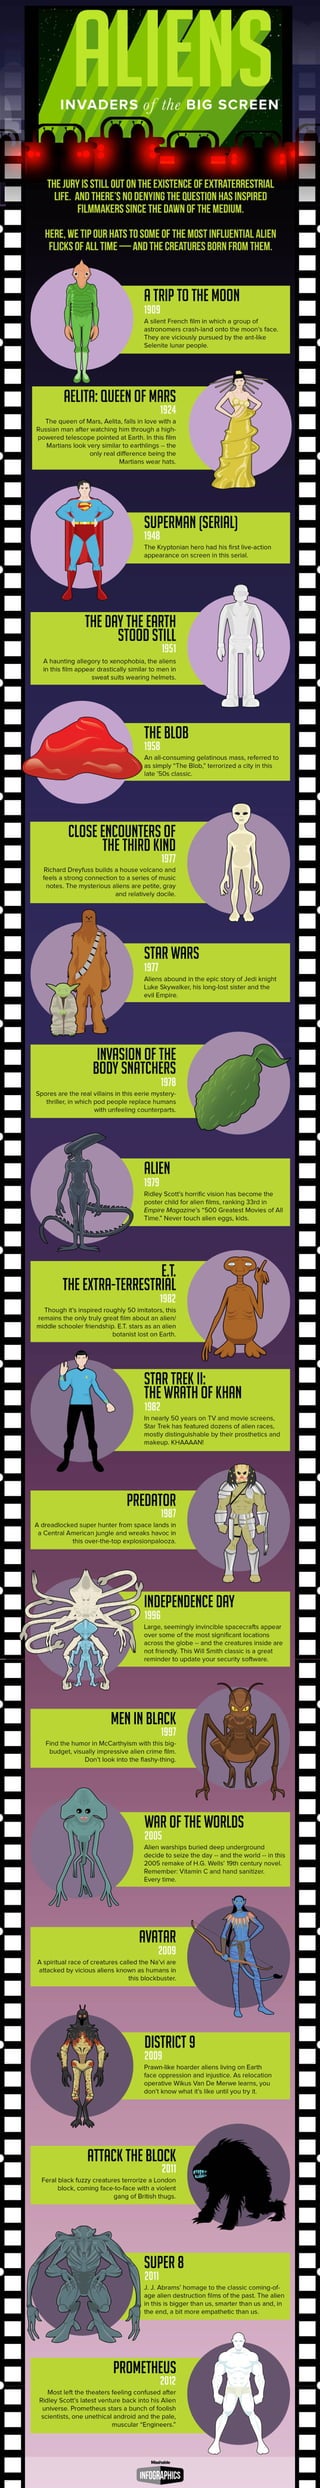 20 Iconic Aliens That Transformed Hollywood